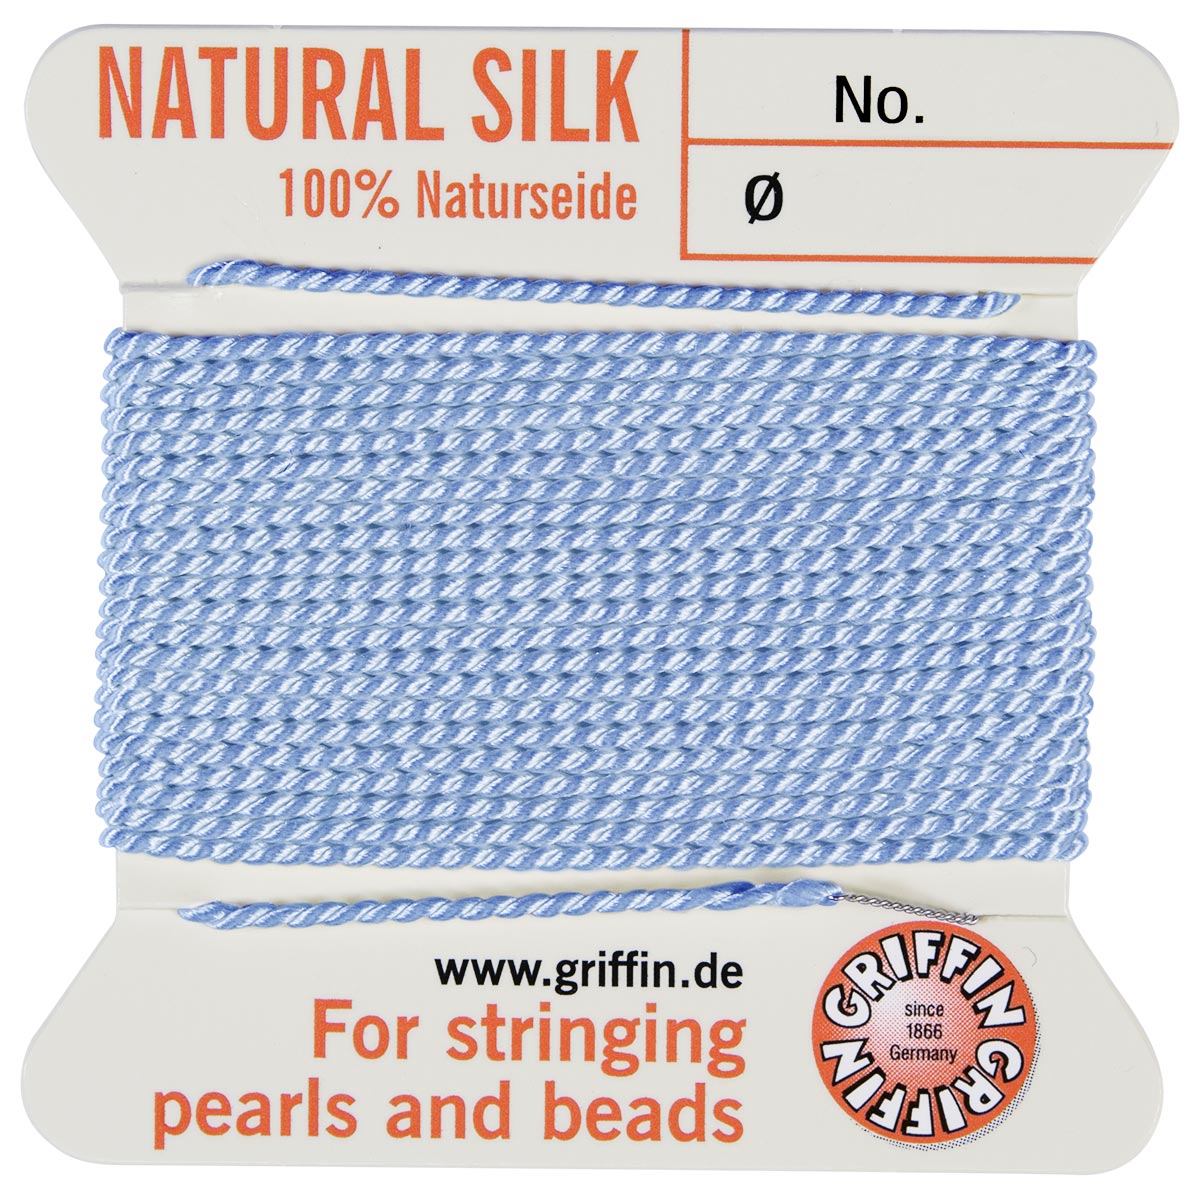 Natural silk blue 1 needle 2 m size 3